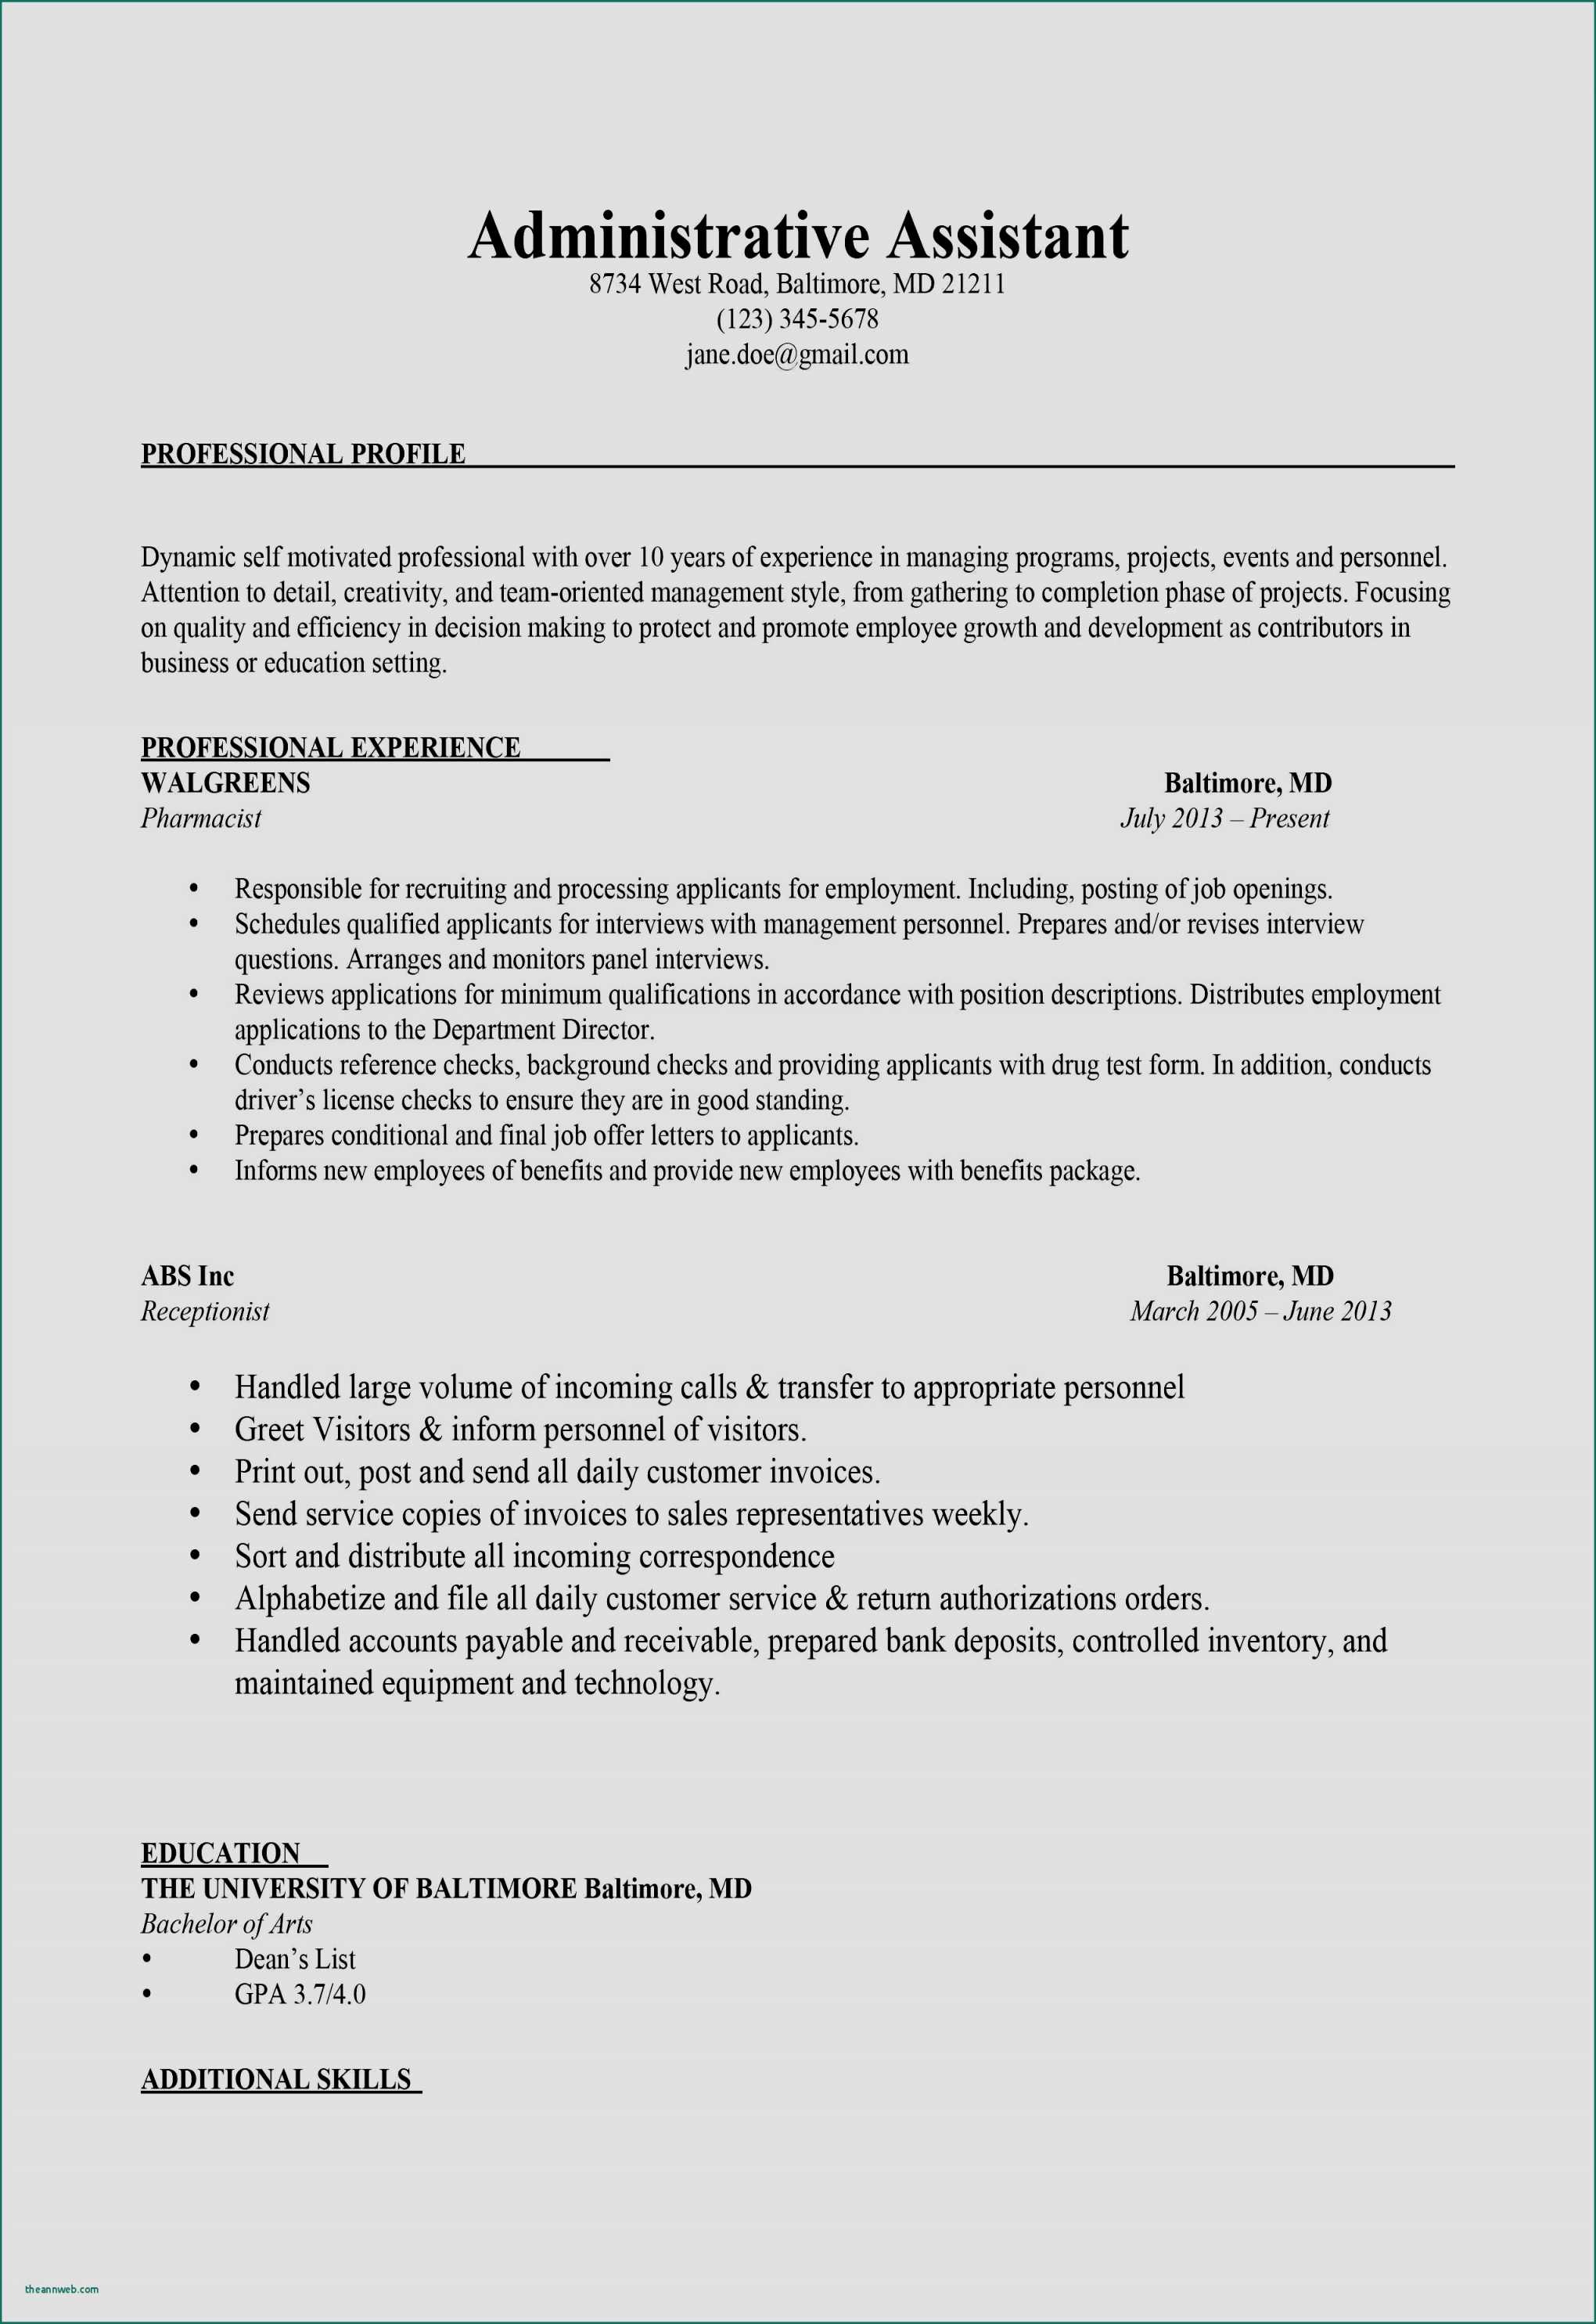 Great Cover Letters Cover Letter Word Template How To Write Great Cover Letters Cover Letter Exaple Cover Letter Cover Letter Word Template great cover letters|wikiresume.com